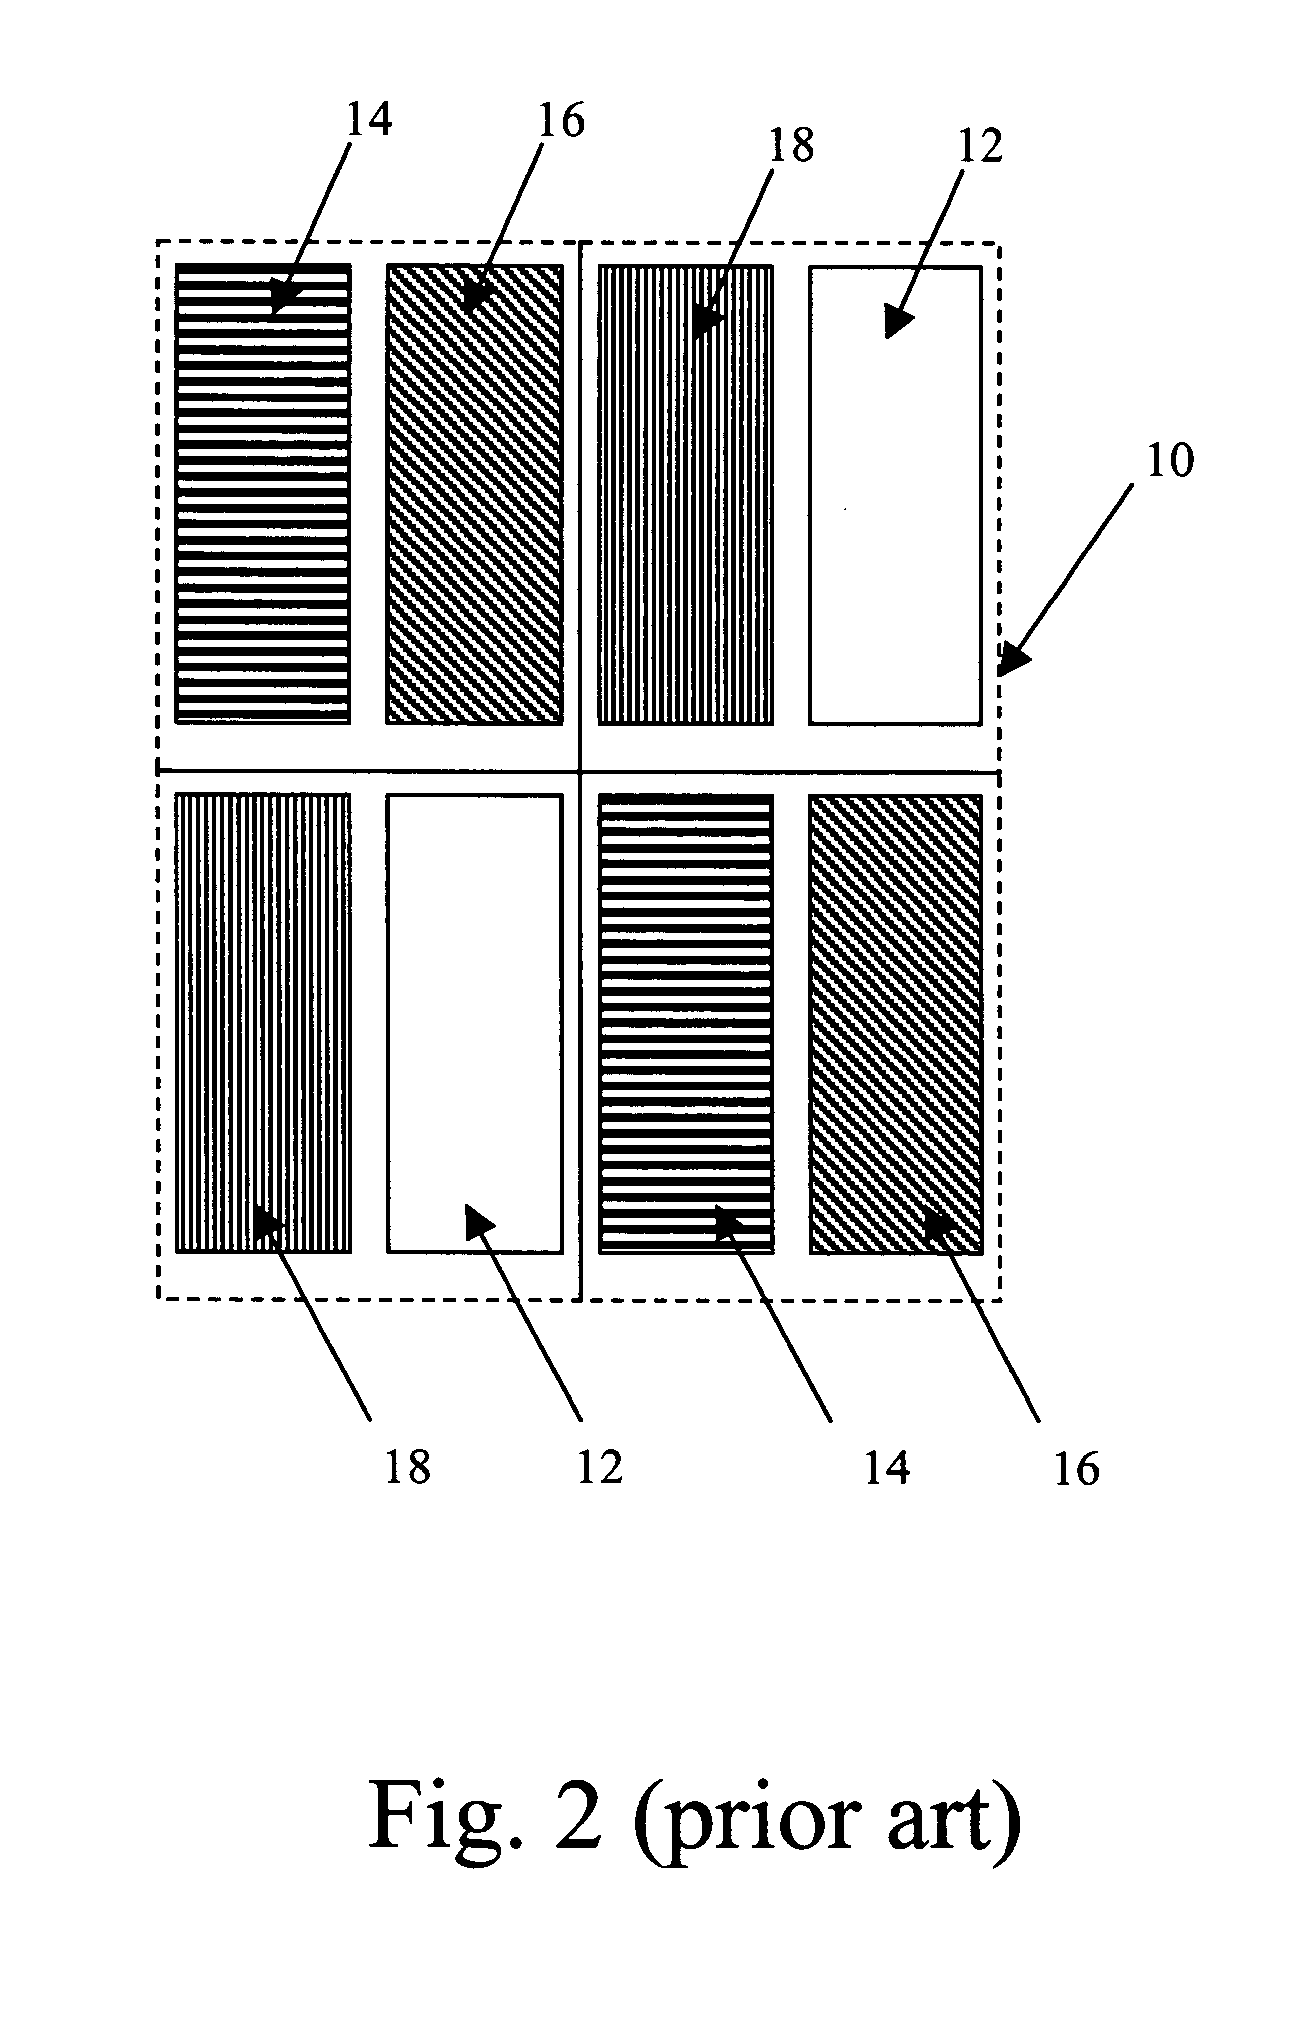 Color EL display system with improved resolution